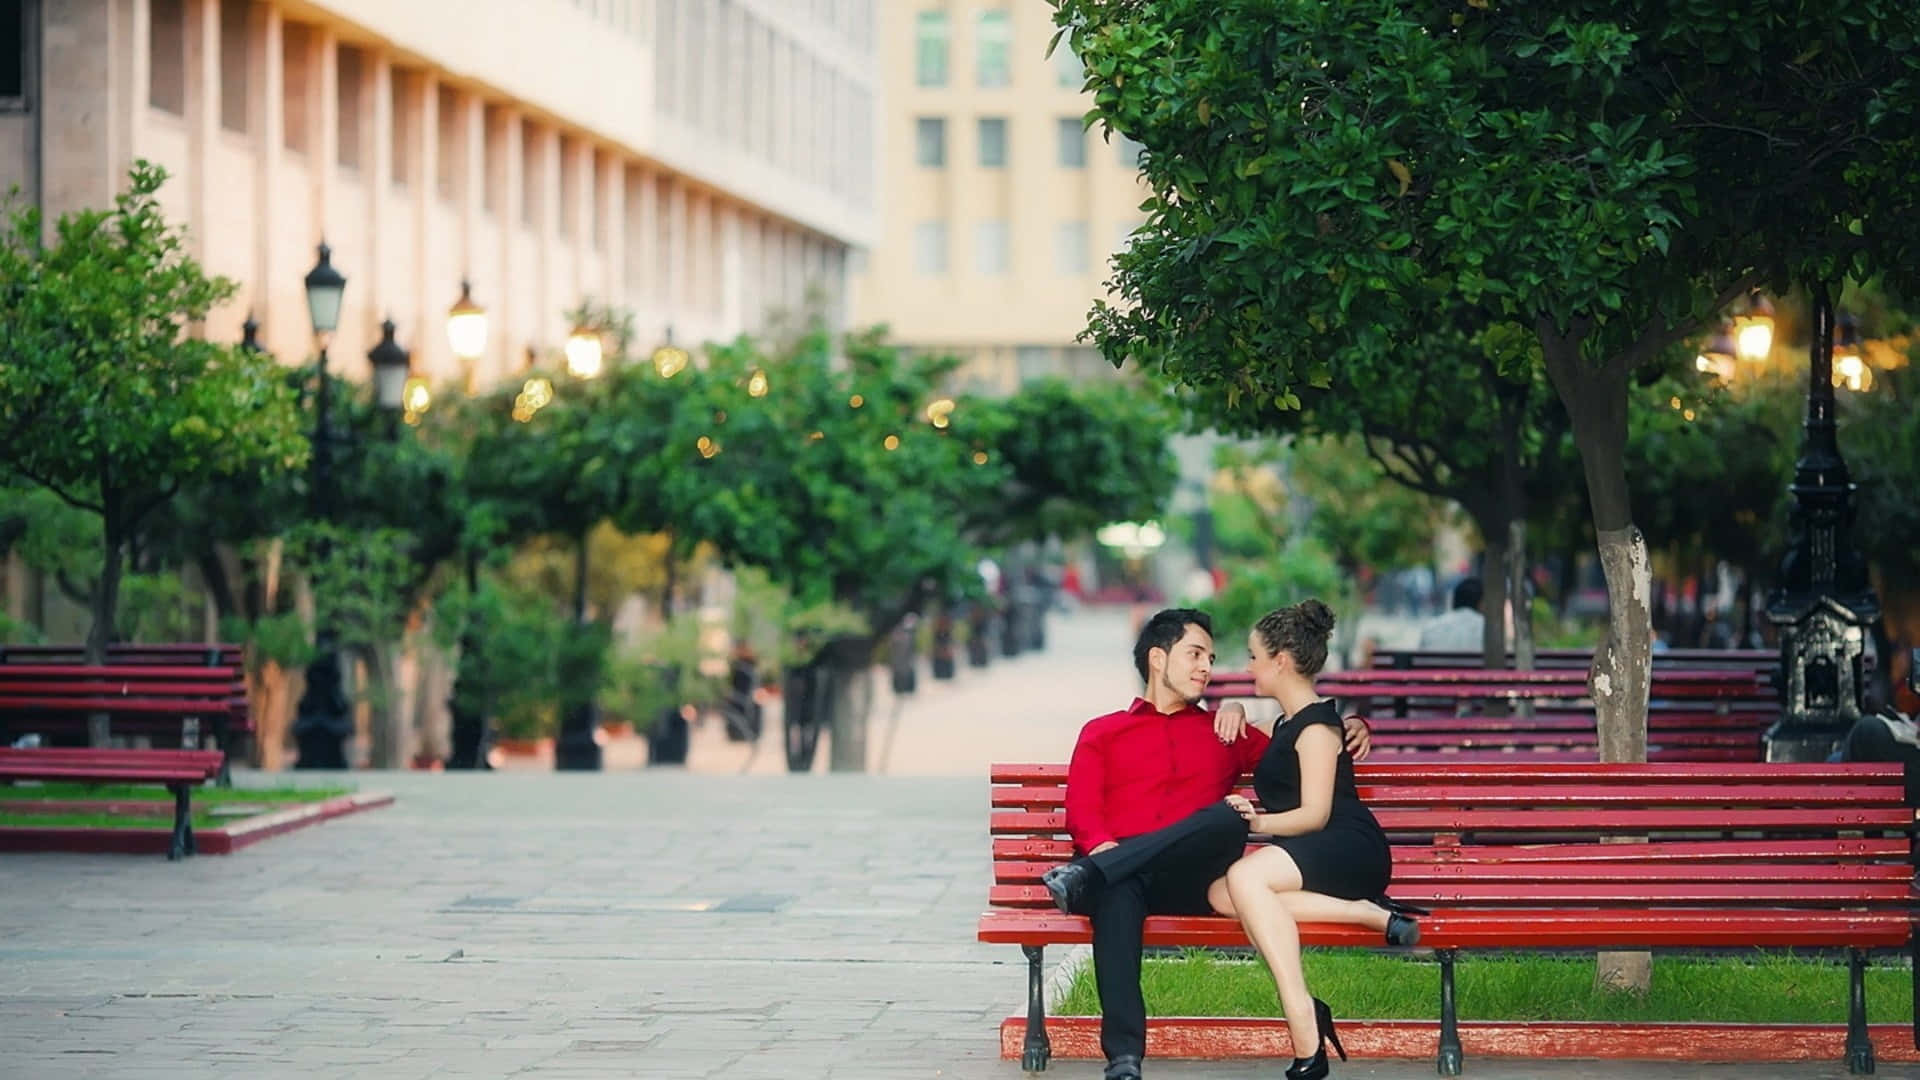 Cute couple enjoying a romantic moment together Wallpaper